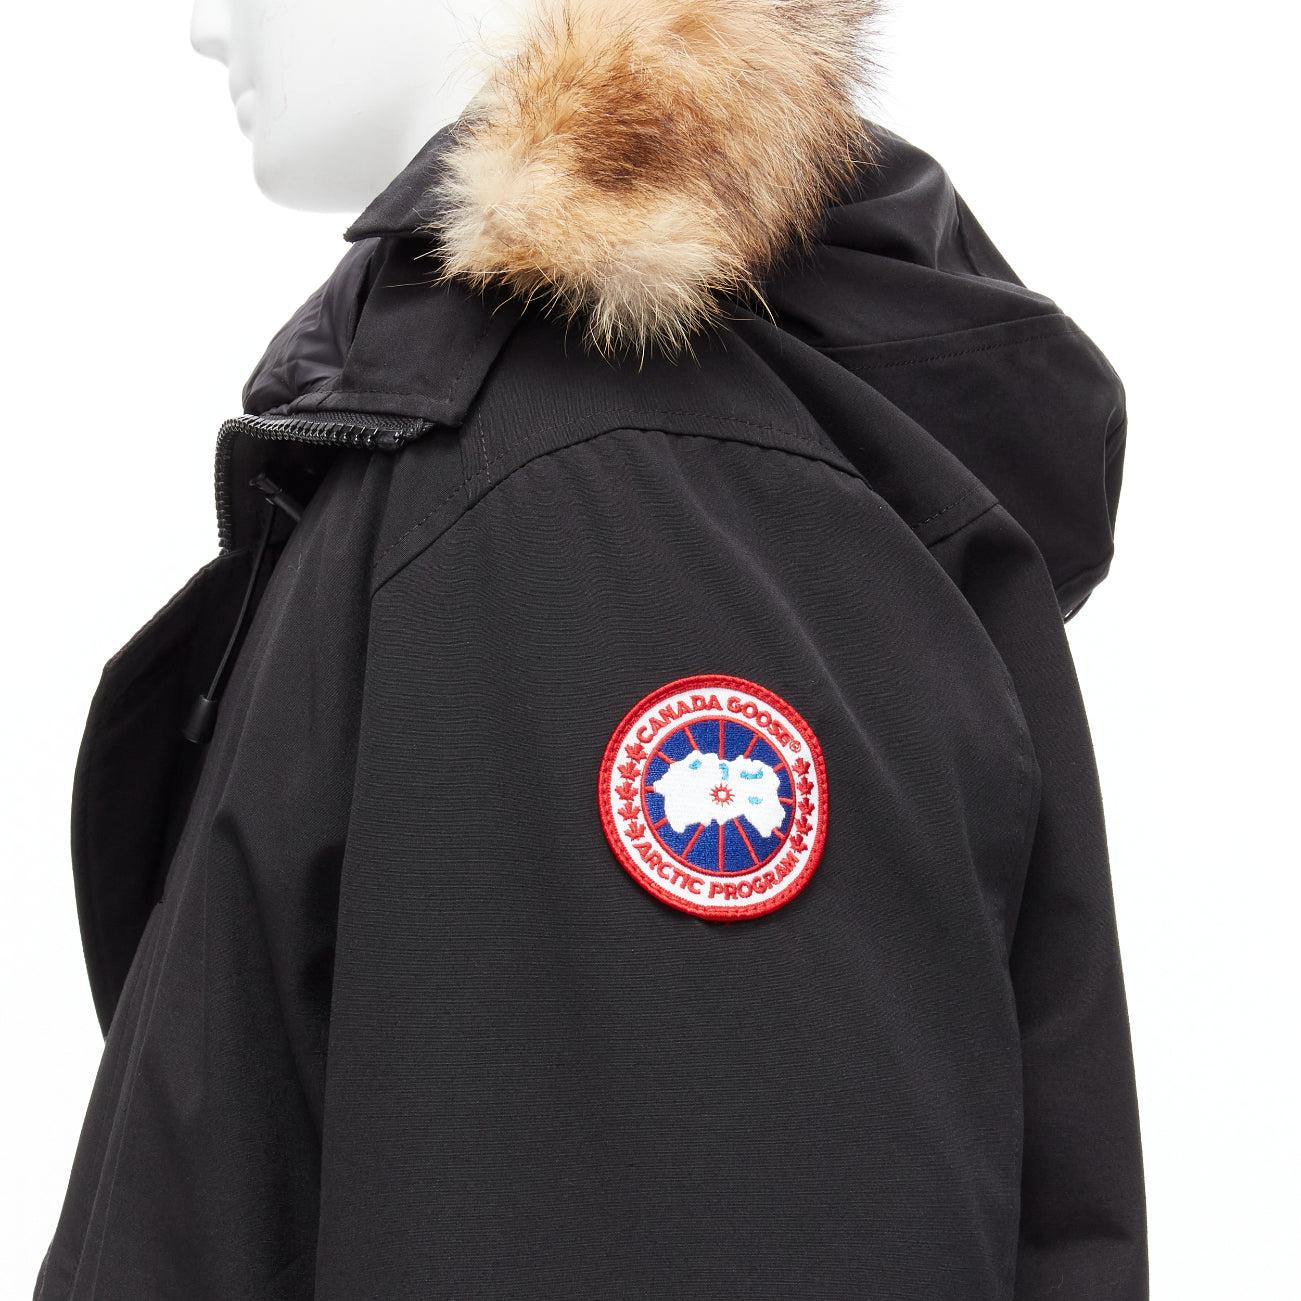 CANADA GOOSE 3426M Chateau Parka coyote fur hood black down padded coat XXL
Reference: CAWG/A00262
Brand: Canada Goose
Collection: 3426M
Material: Polyester, Cotton
Color: Black, Brown
Pattern: Solid
Closure: Zip
Lining: Black Down
Extra Details: